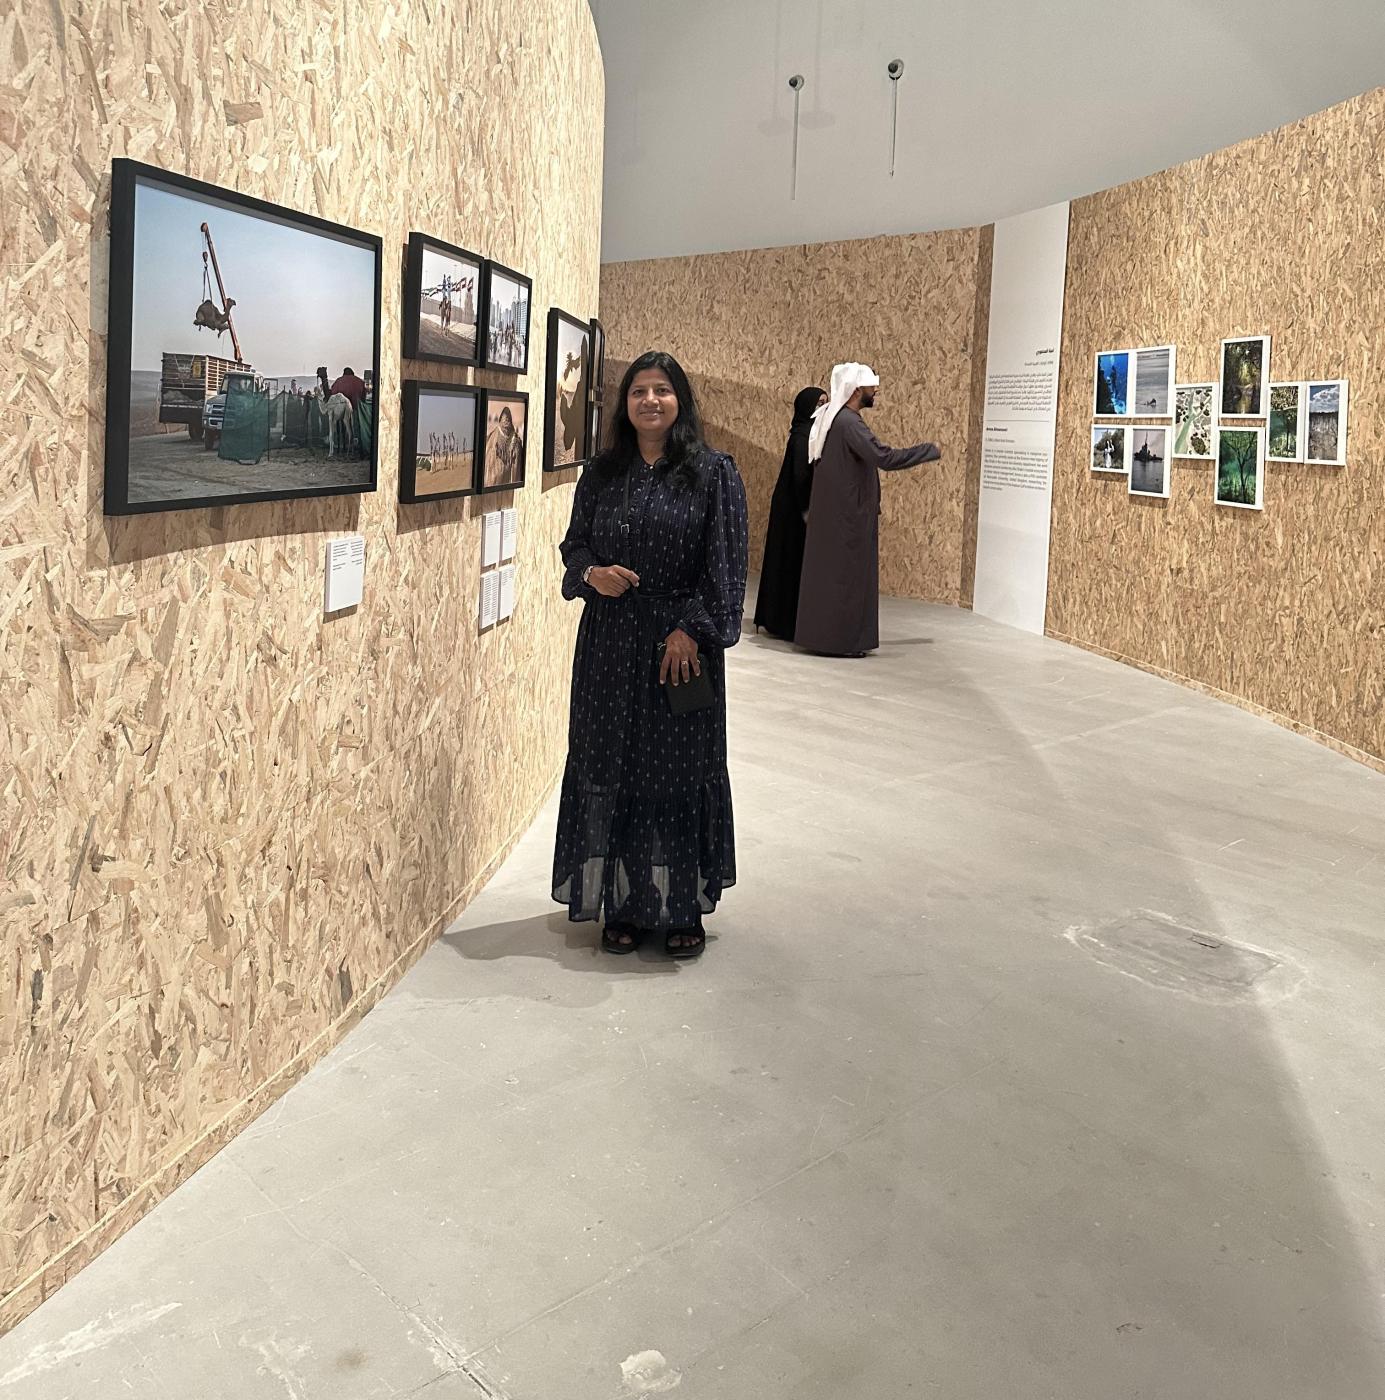 "ROOTED" SUSTAINABILITY AN ART PERSPECTIVE, UAE